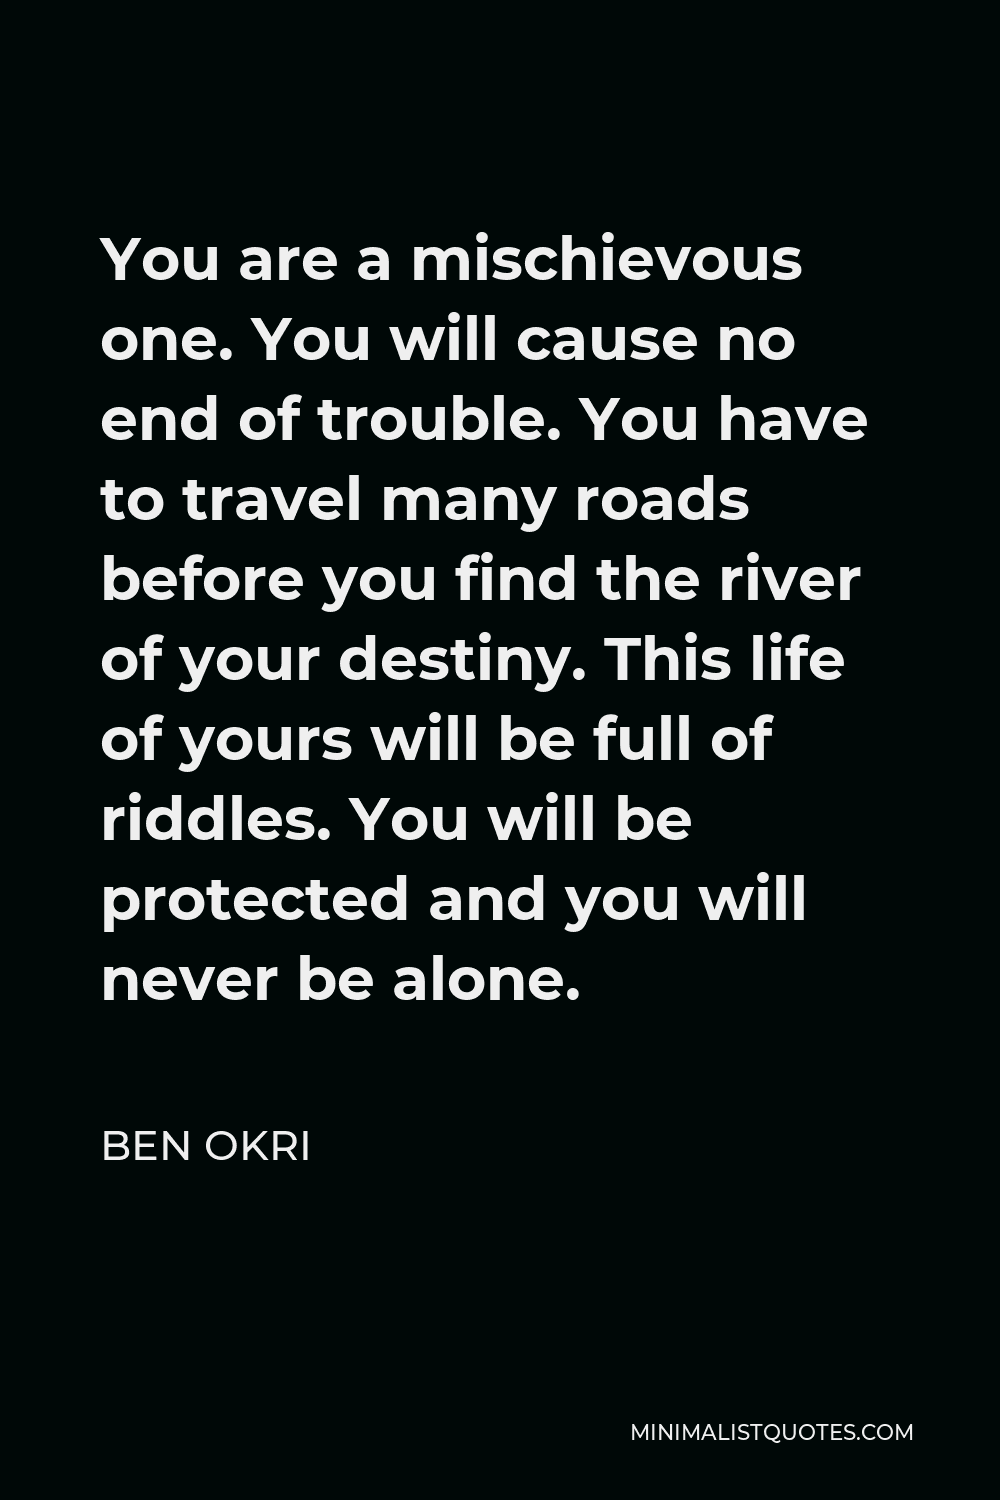 Ben Okri Quote - You are a mischievous one. You will cause no end of trouble. You have to travel many roads before you find the river of your destiny. This life of yours will be full of riddles. You will be protected and you will never be alone.